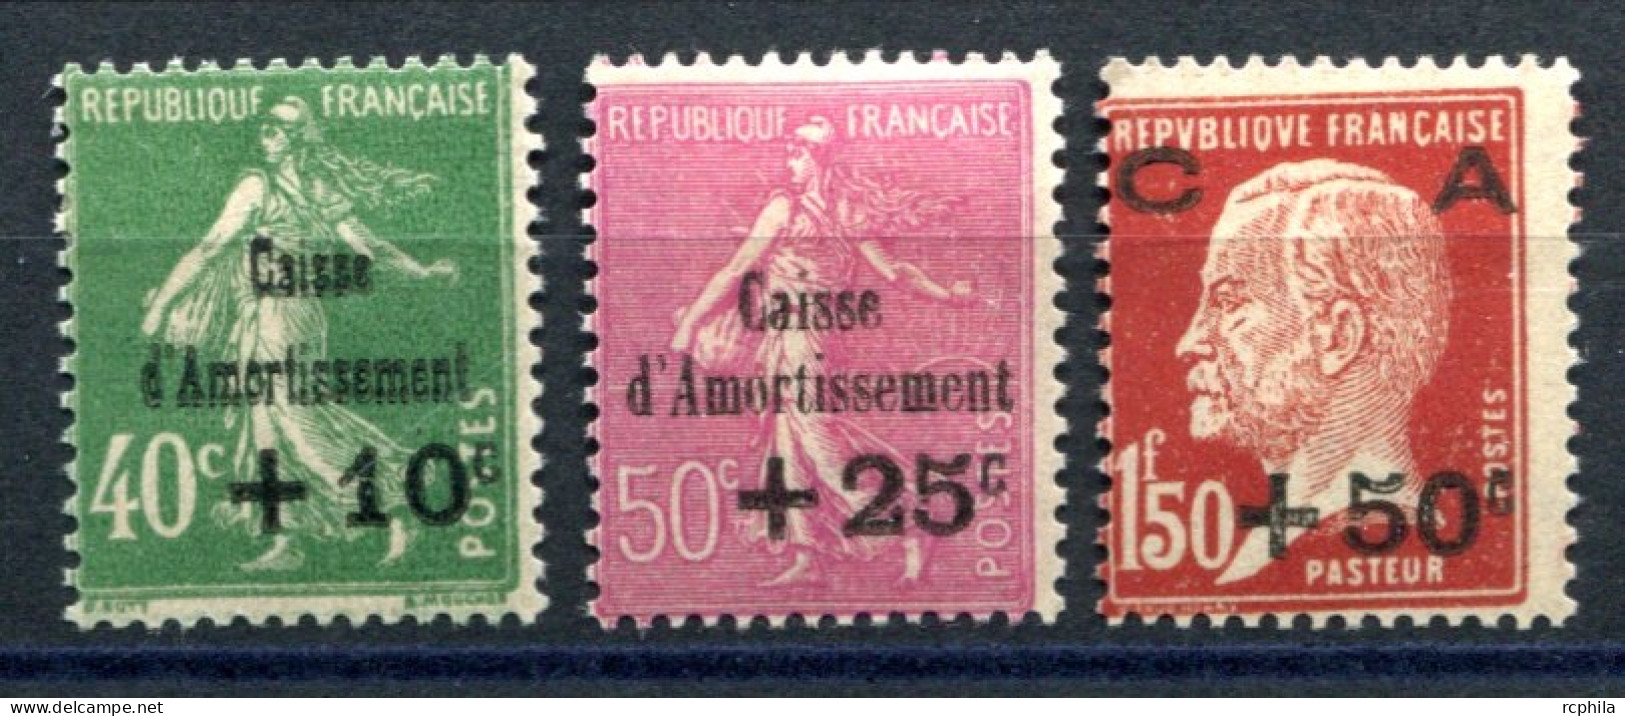 RC 27574 FRANCE COTE 120€ N° 253 / 255 SERIE CAISSE D'AMORTISSEMENT NEUF * MN TB - Unused Stamps